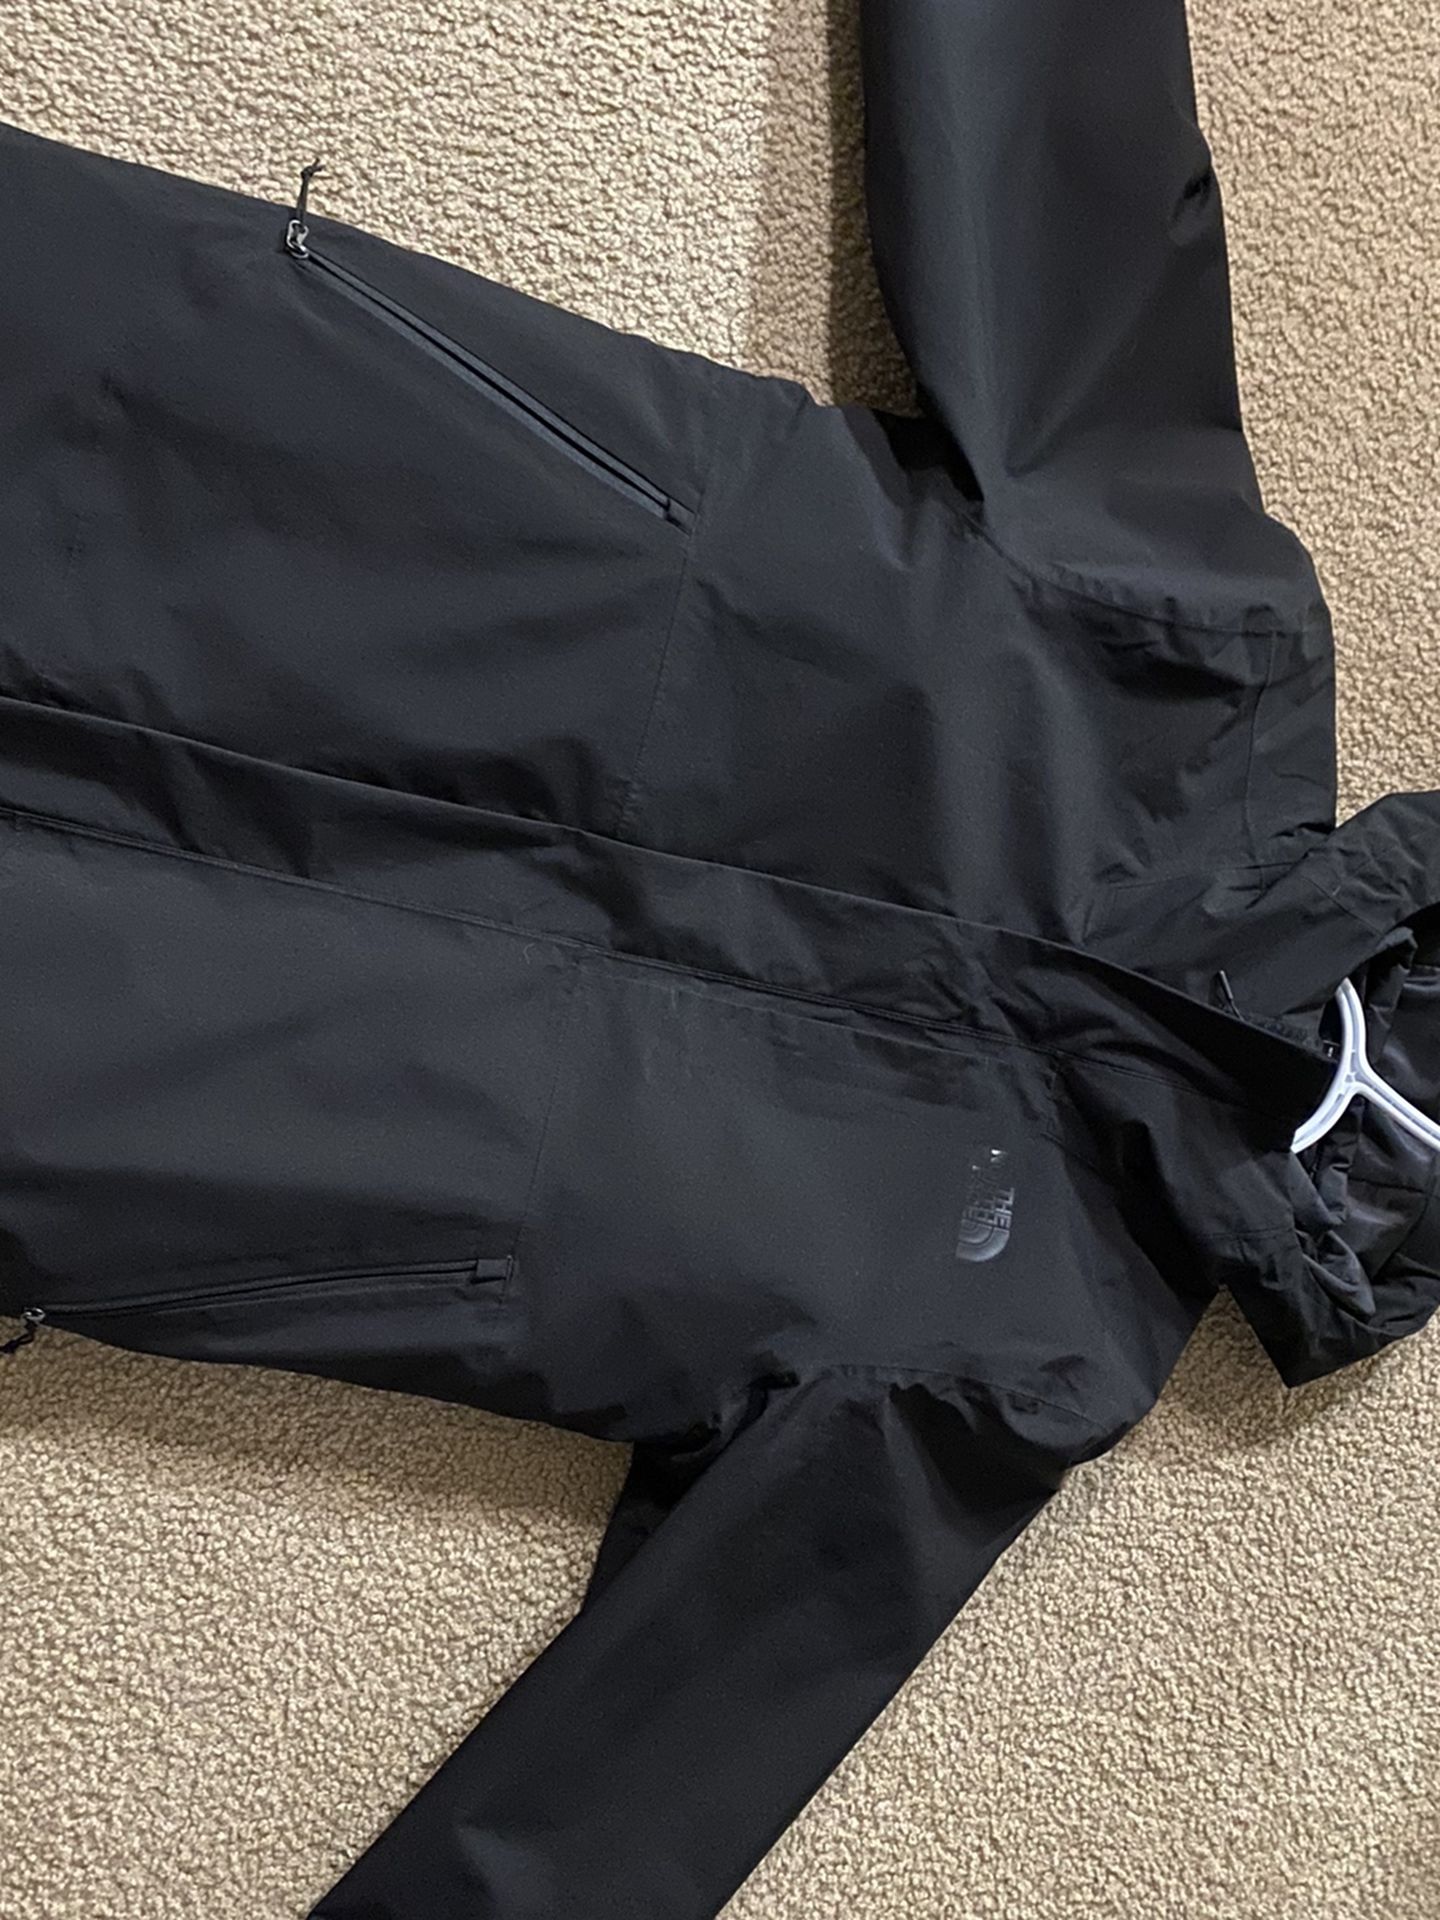 North Face Wind Breaker And jacket 2 In 1